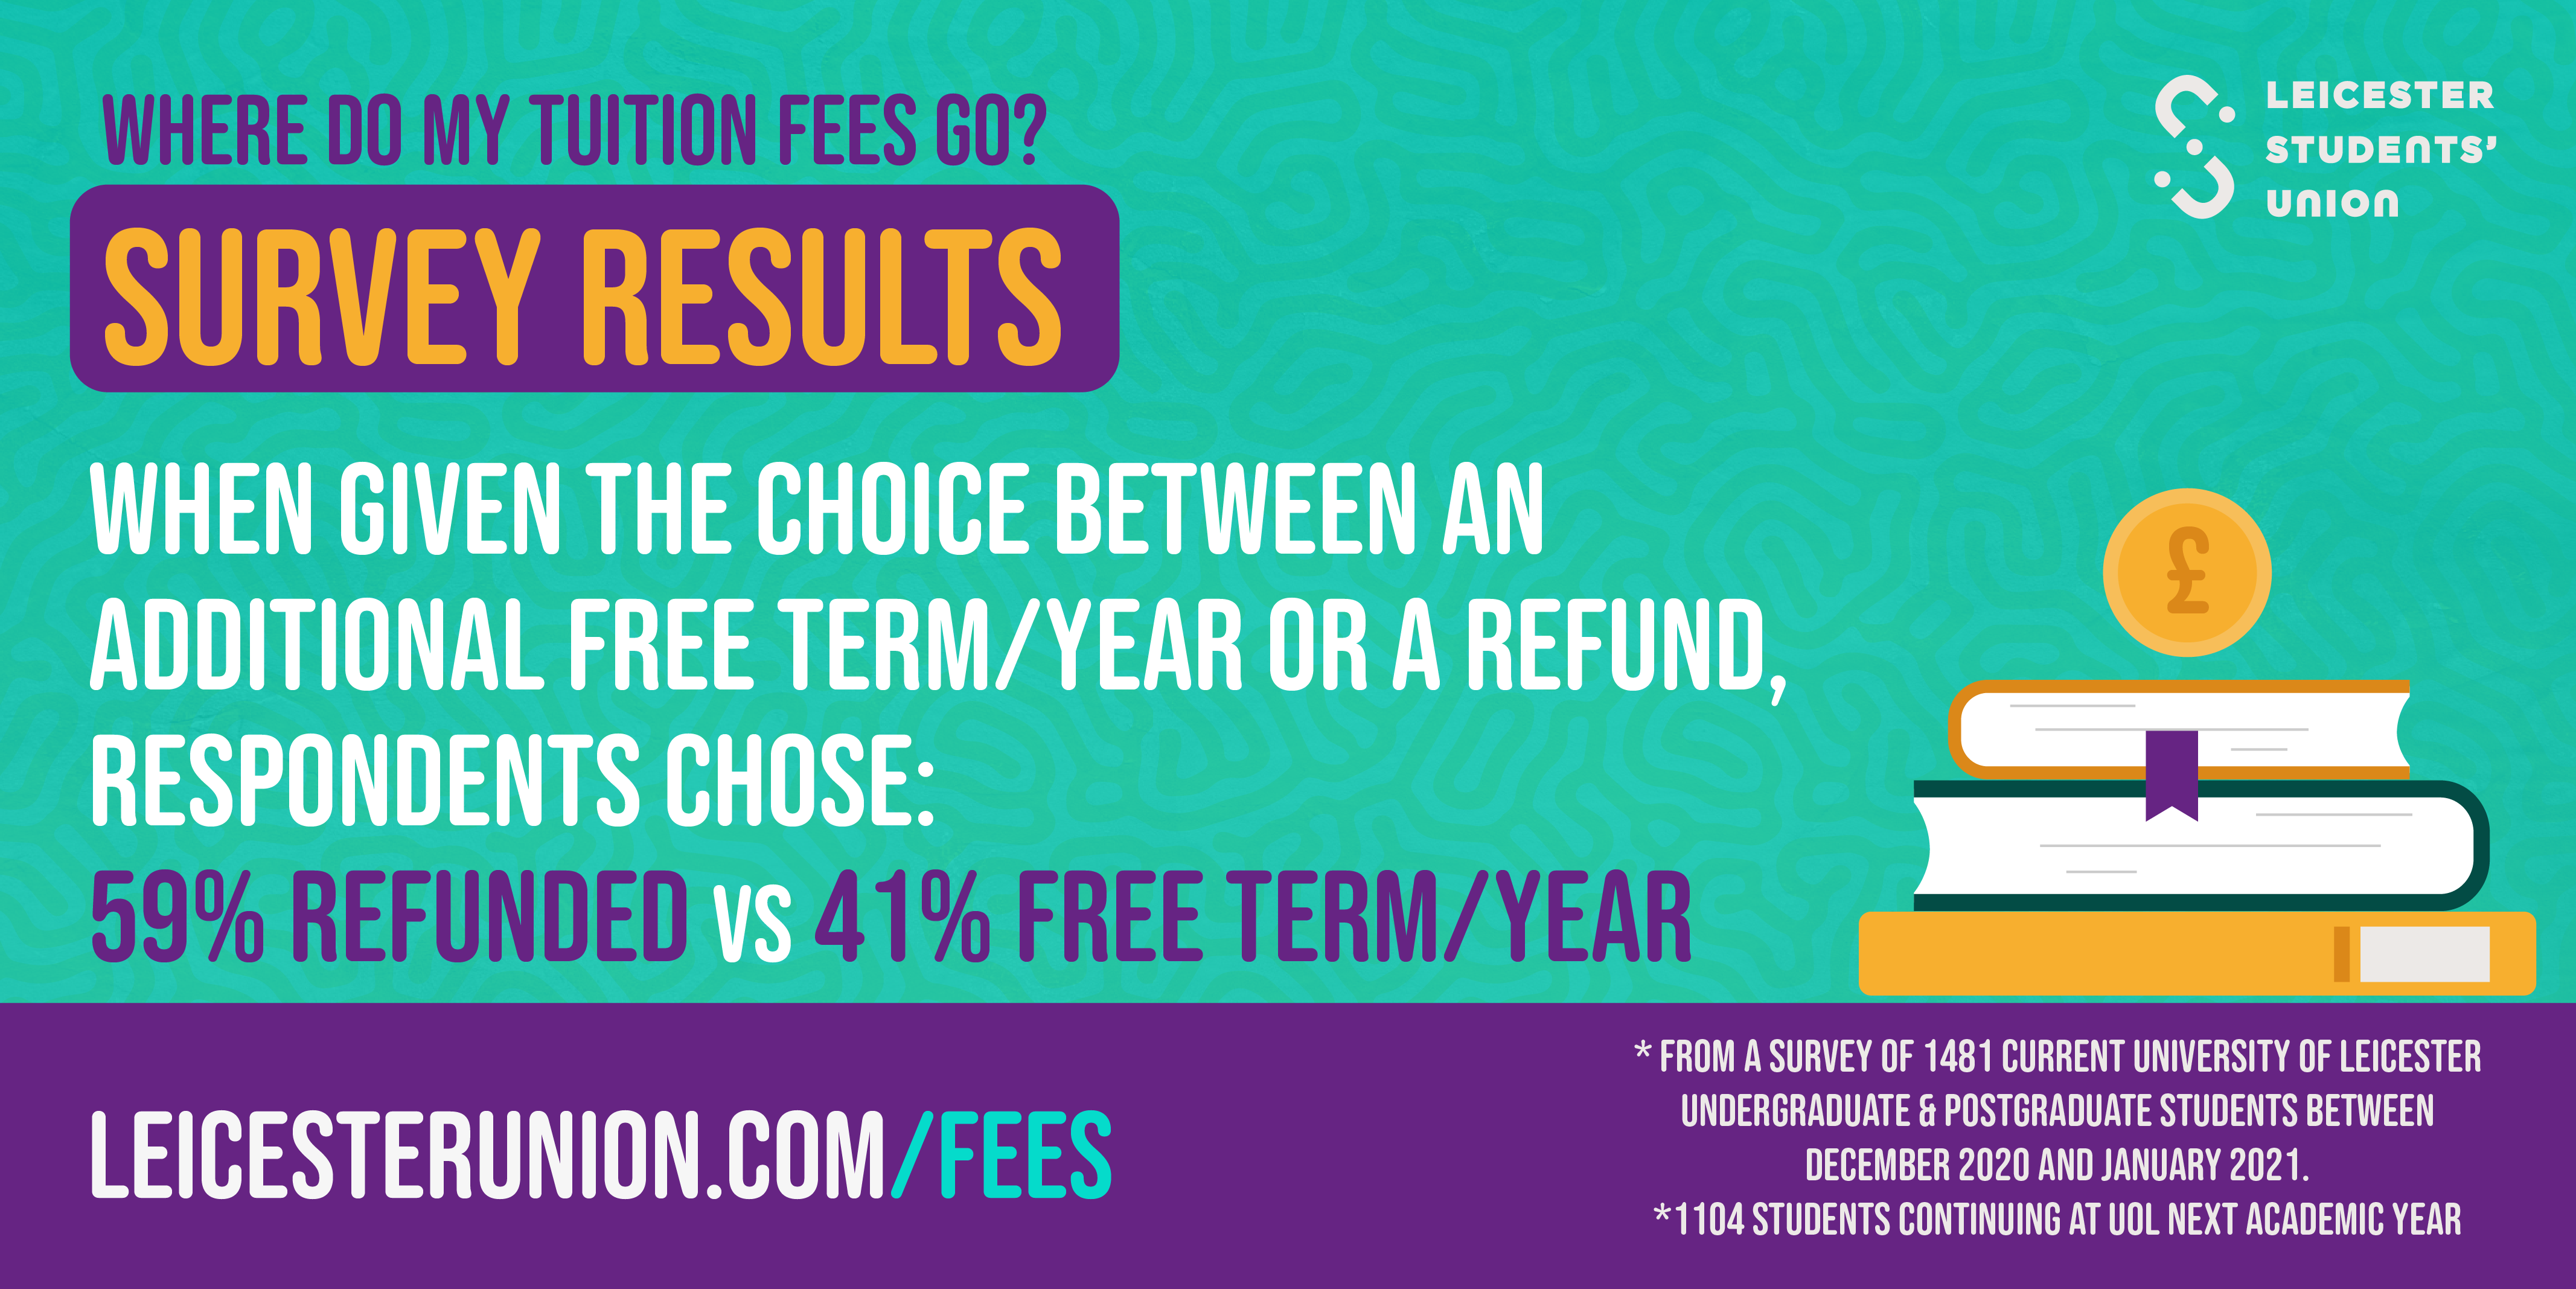 when given the choice between an additional free term/year or a refund, respondents chose. 59% refunded vs 41% free term/year